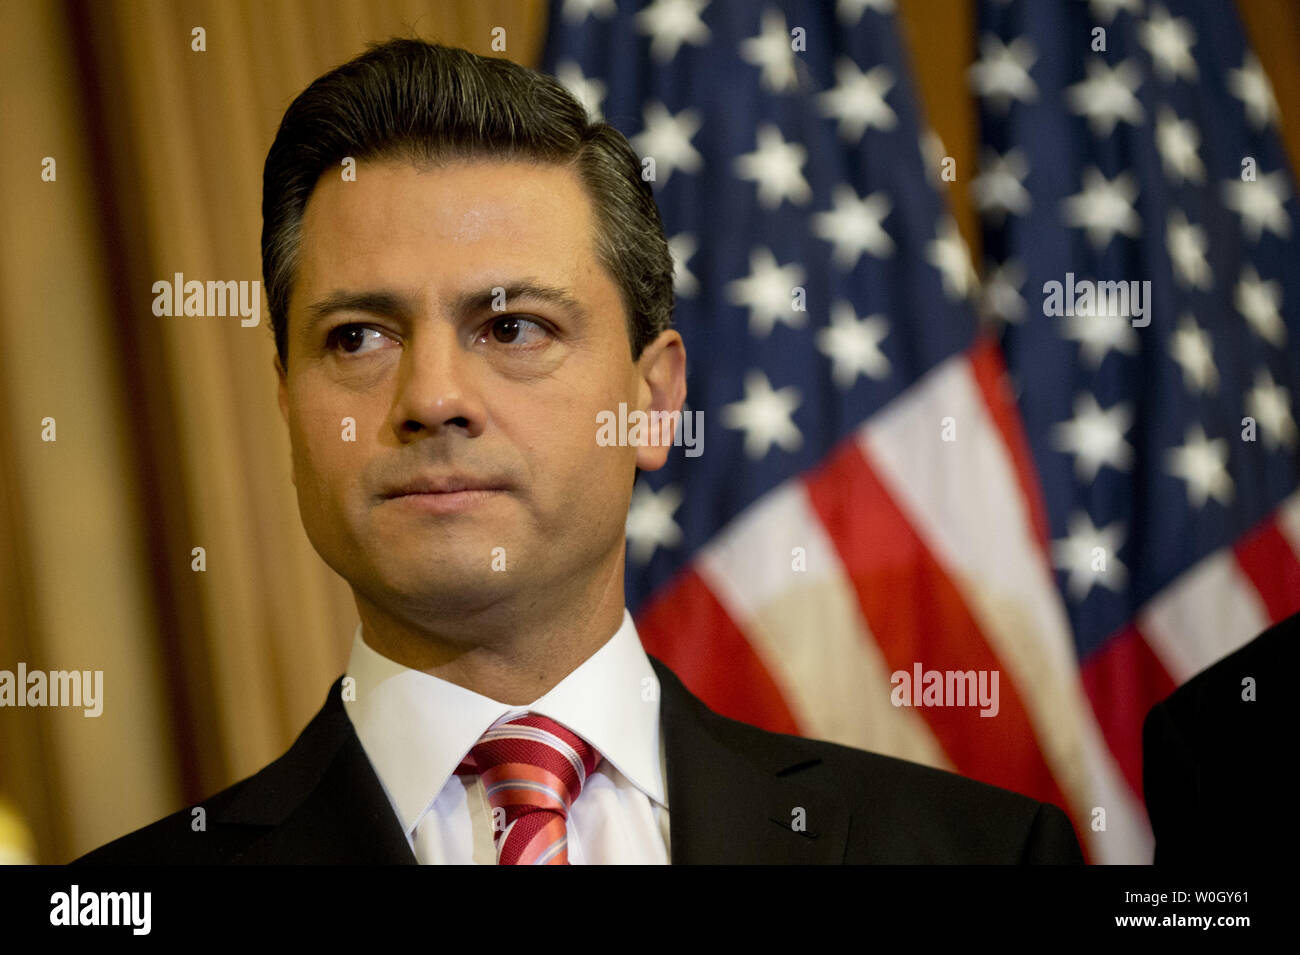 Mexican President-elect Enrique Pena Nieto is seen during a media availability with House Minority Leader Nancy Pelosi (D-CA) on Capitol Hill in Washington, DC on November 27, 2012.  UPI/Kevin Dietsch Stock Photo